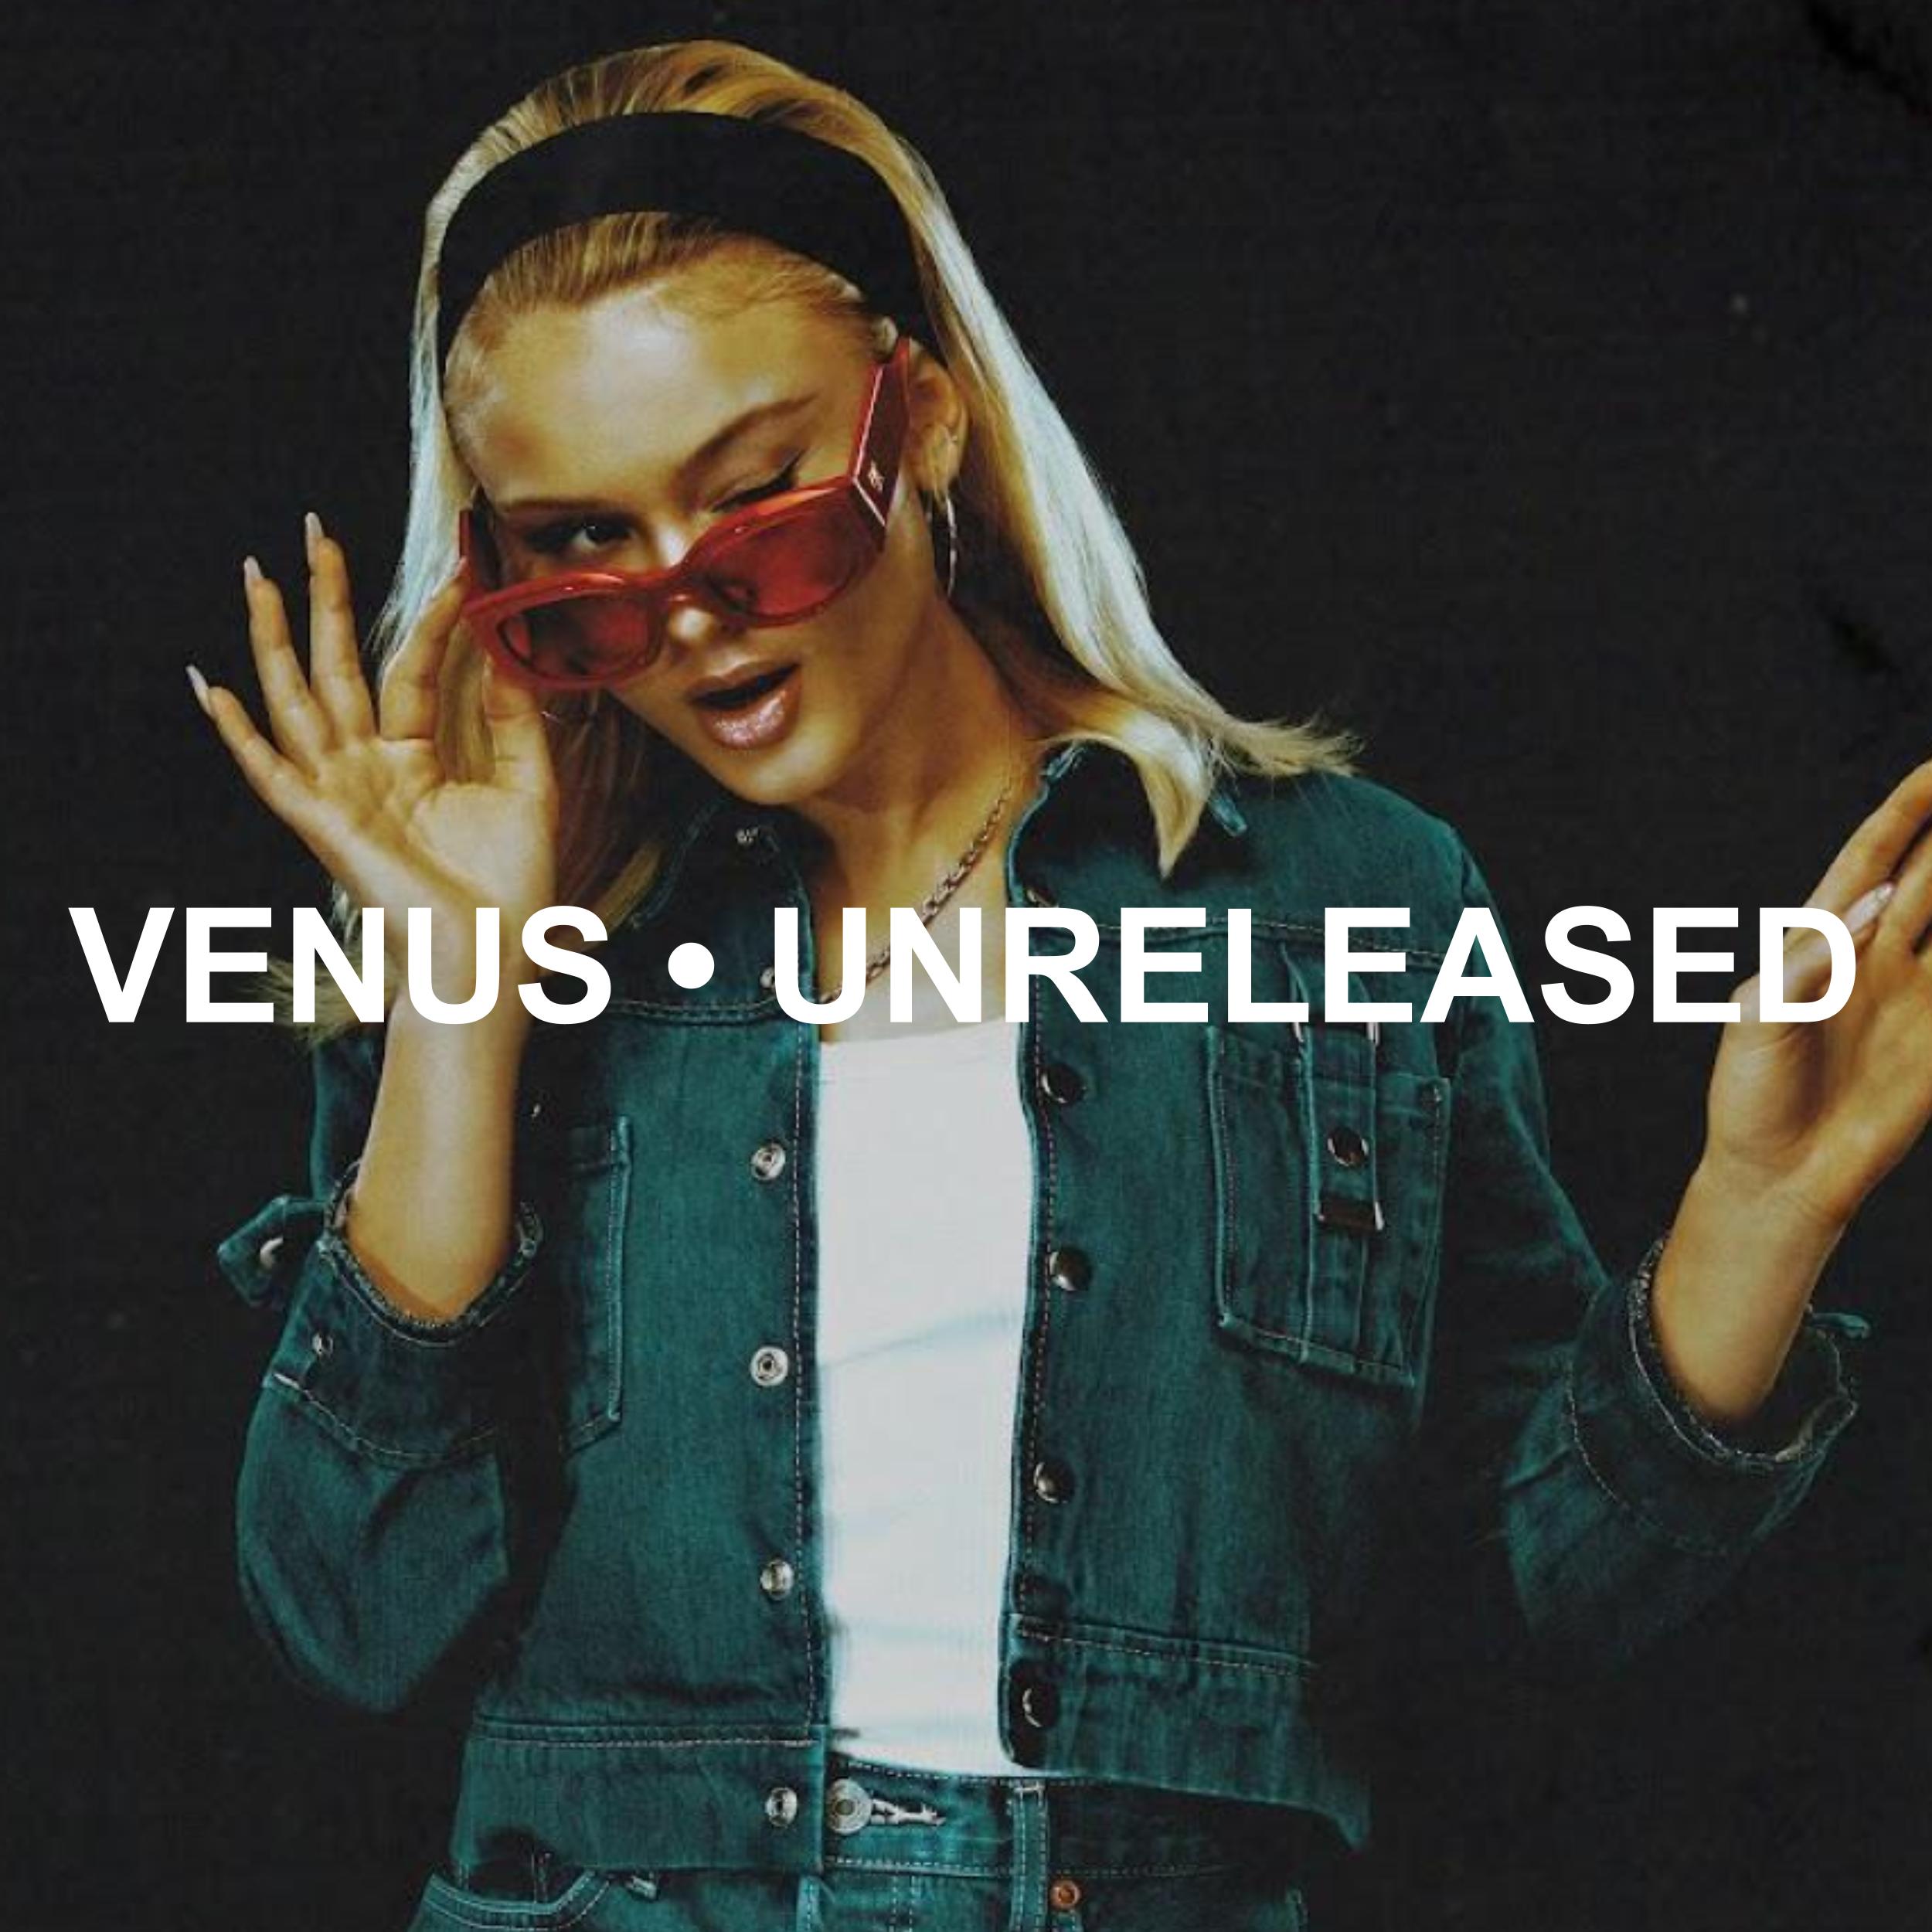 The cover of 'Venus' by Zara Larsson without clothes that reminded